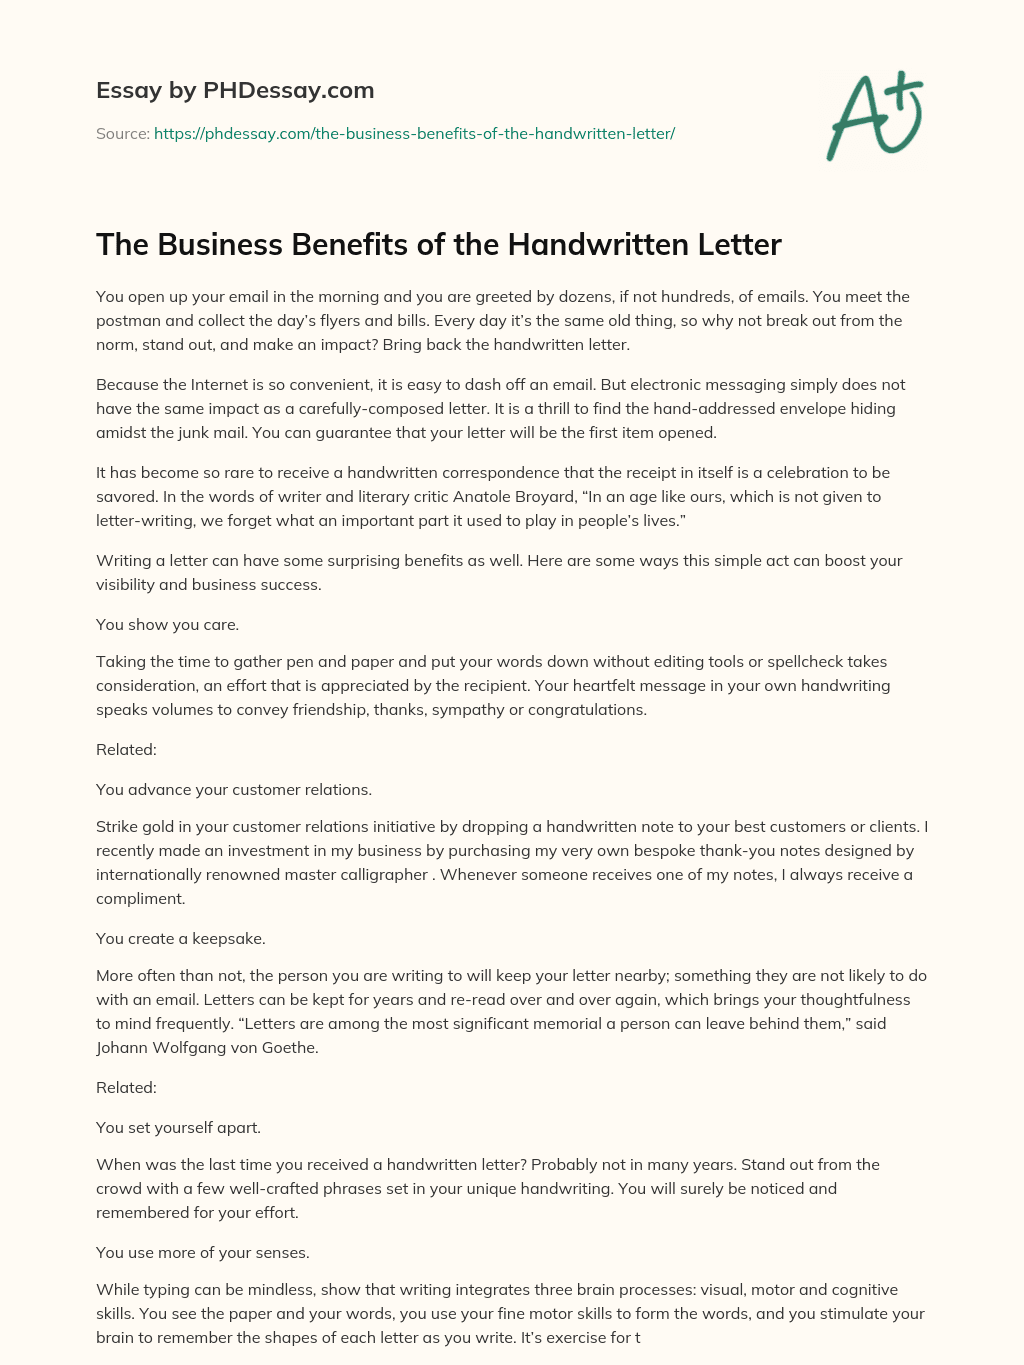 The Business Benefits of the Handwritten Letter essay